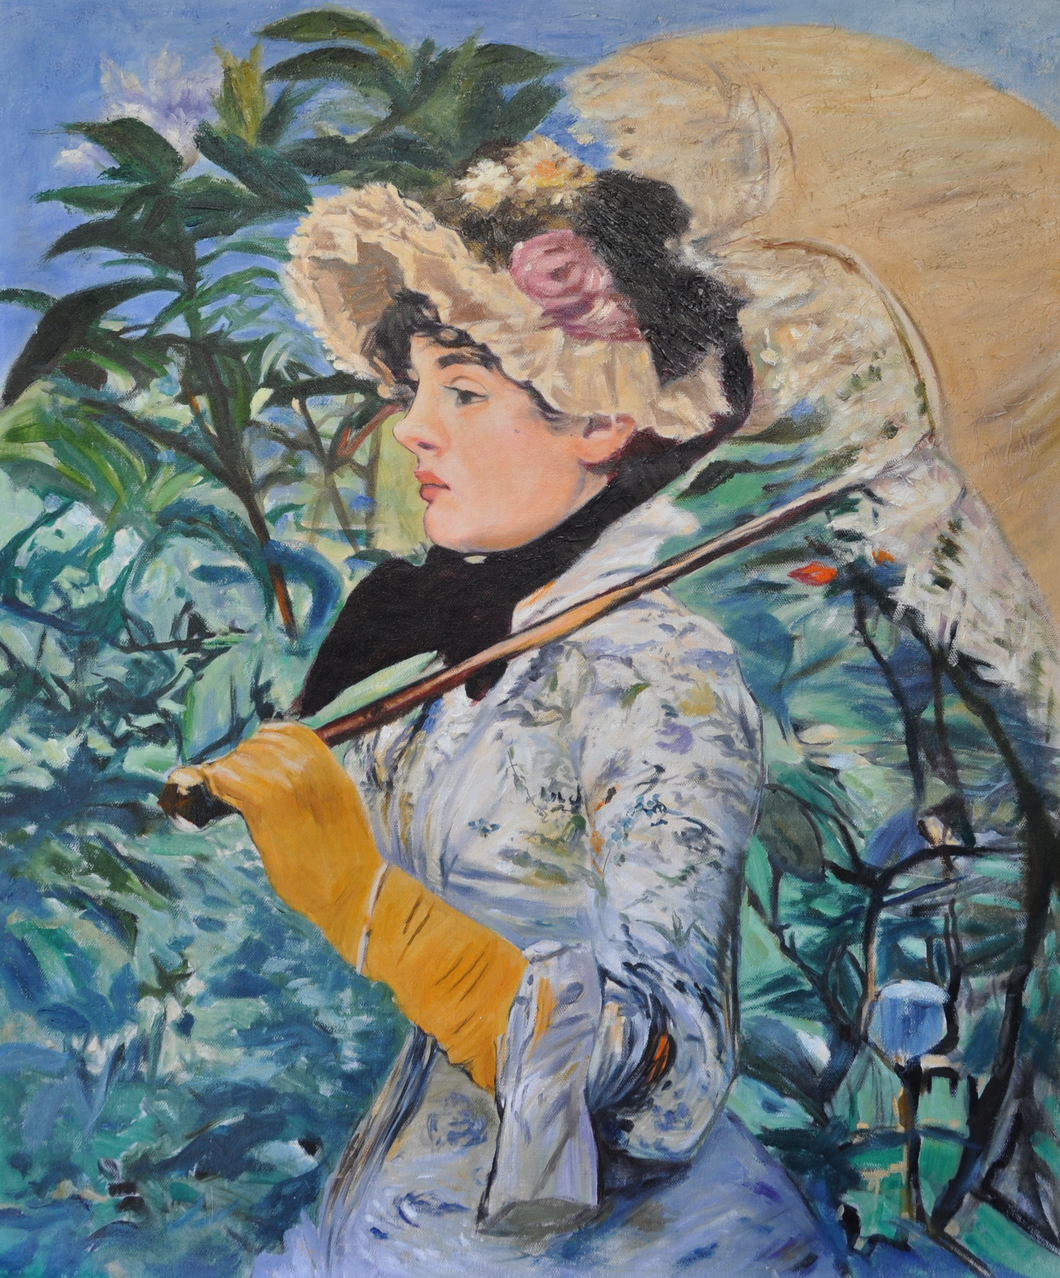 Jeanne: Spring is a painting by Édouard Manet that was created in 1881.